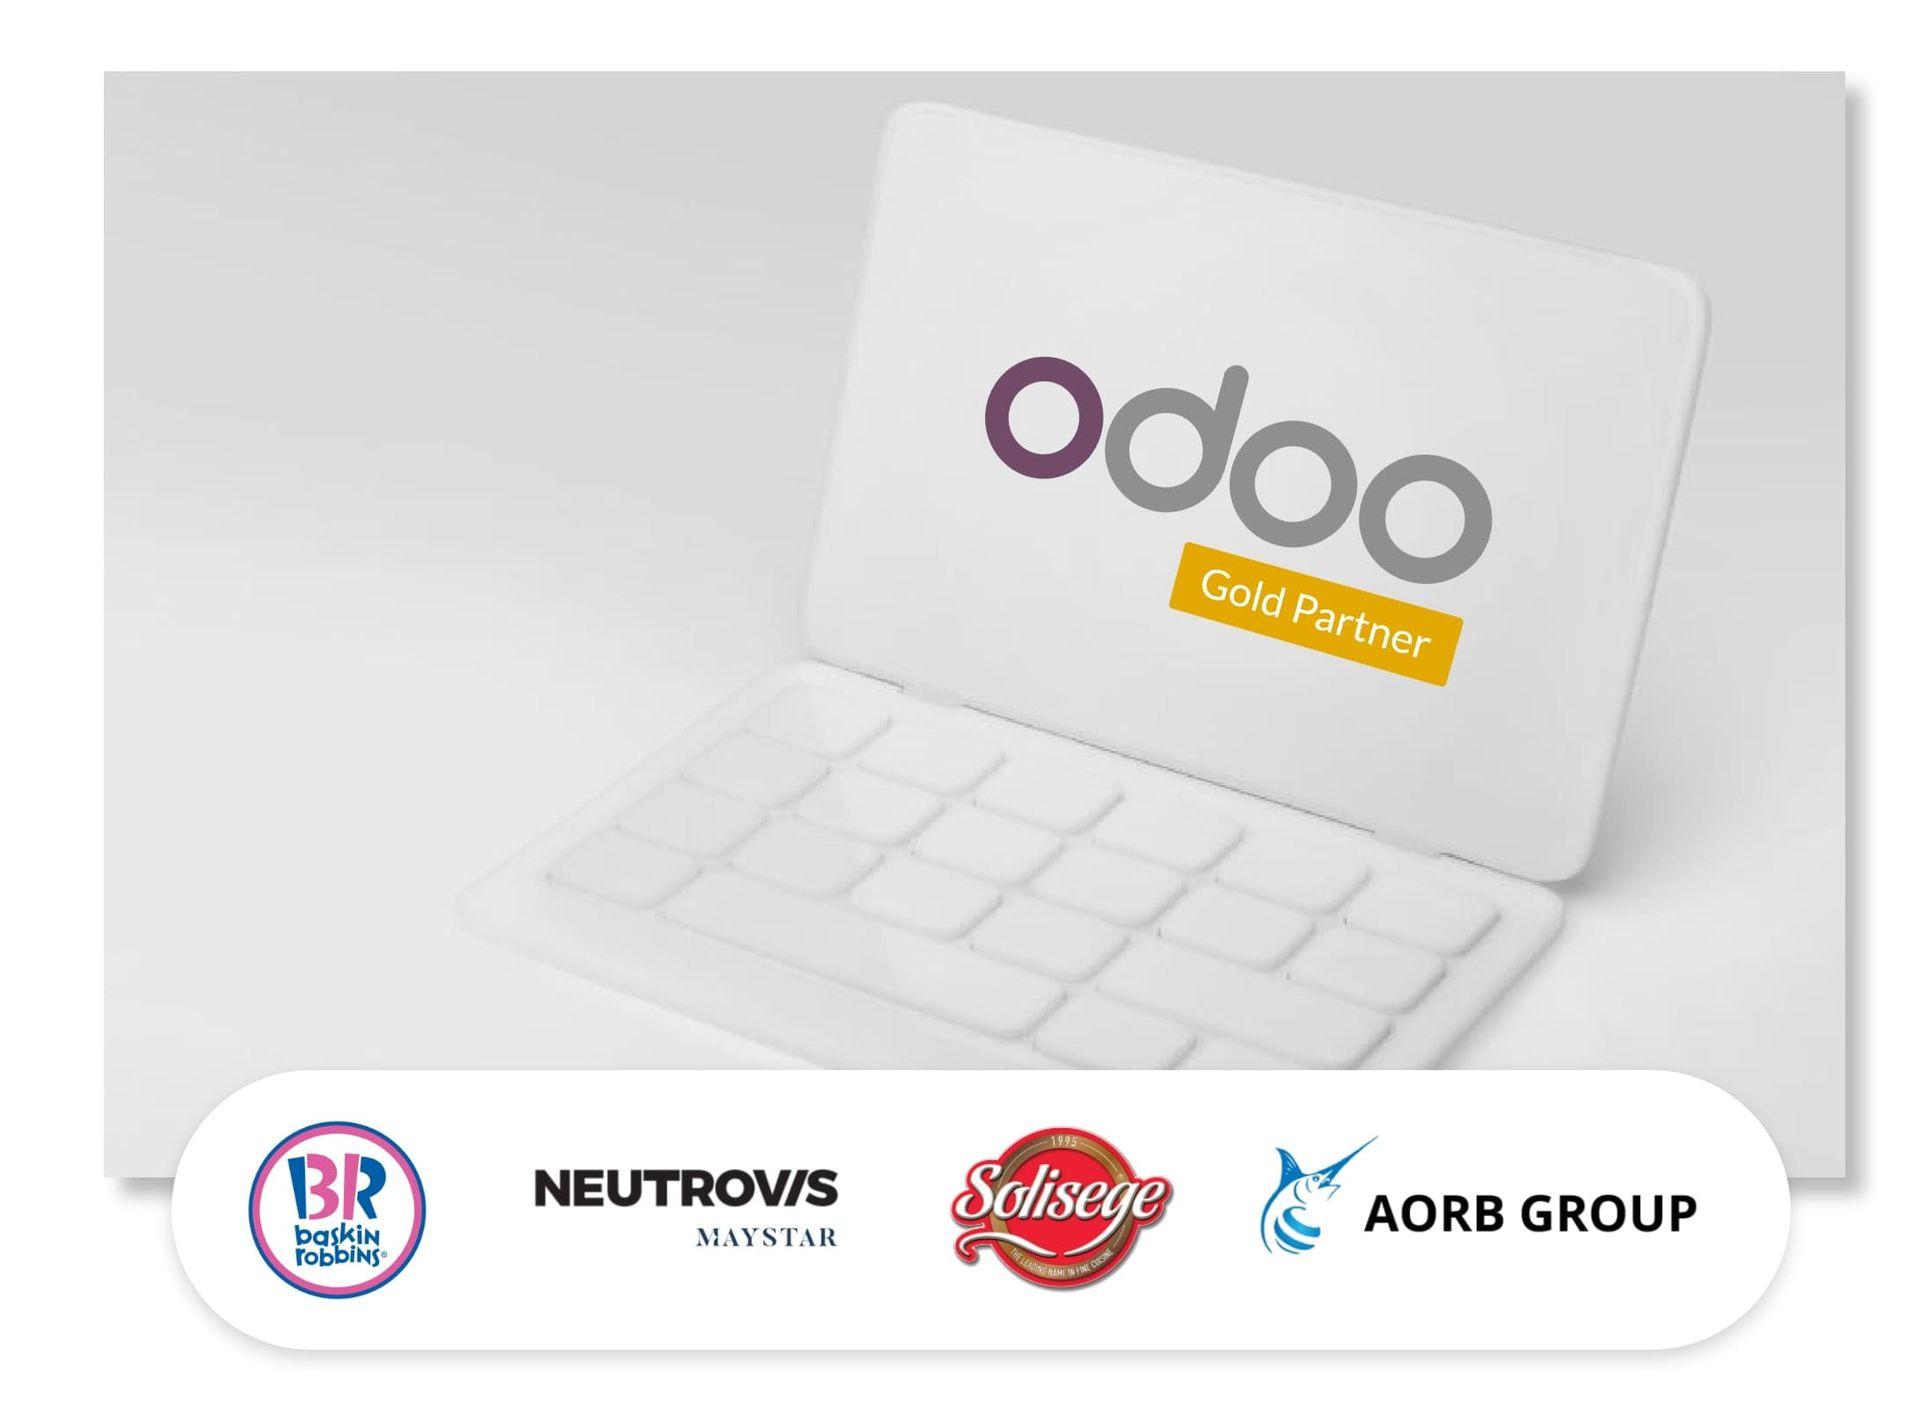 Onnet Consulting is an Odoo Malaysia Gold Partner that is well trusted by companies like Baskin-Robbins, Neutrovis, Solisege, and AORB Group.